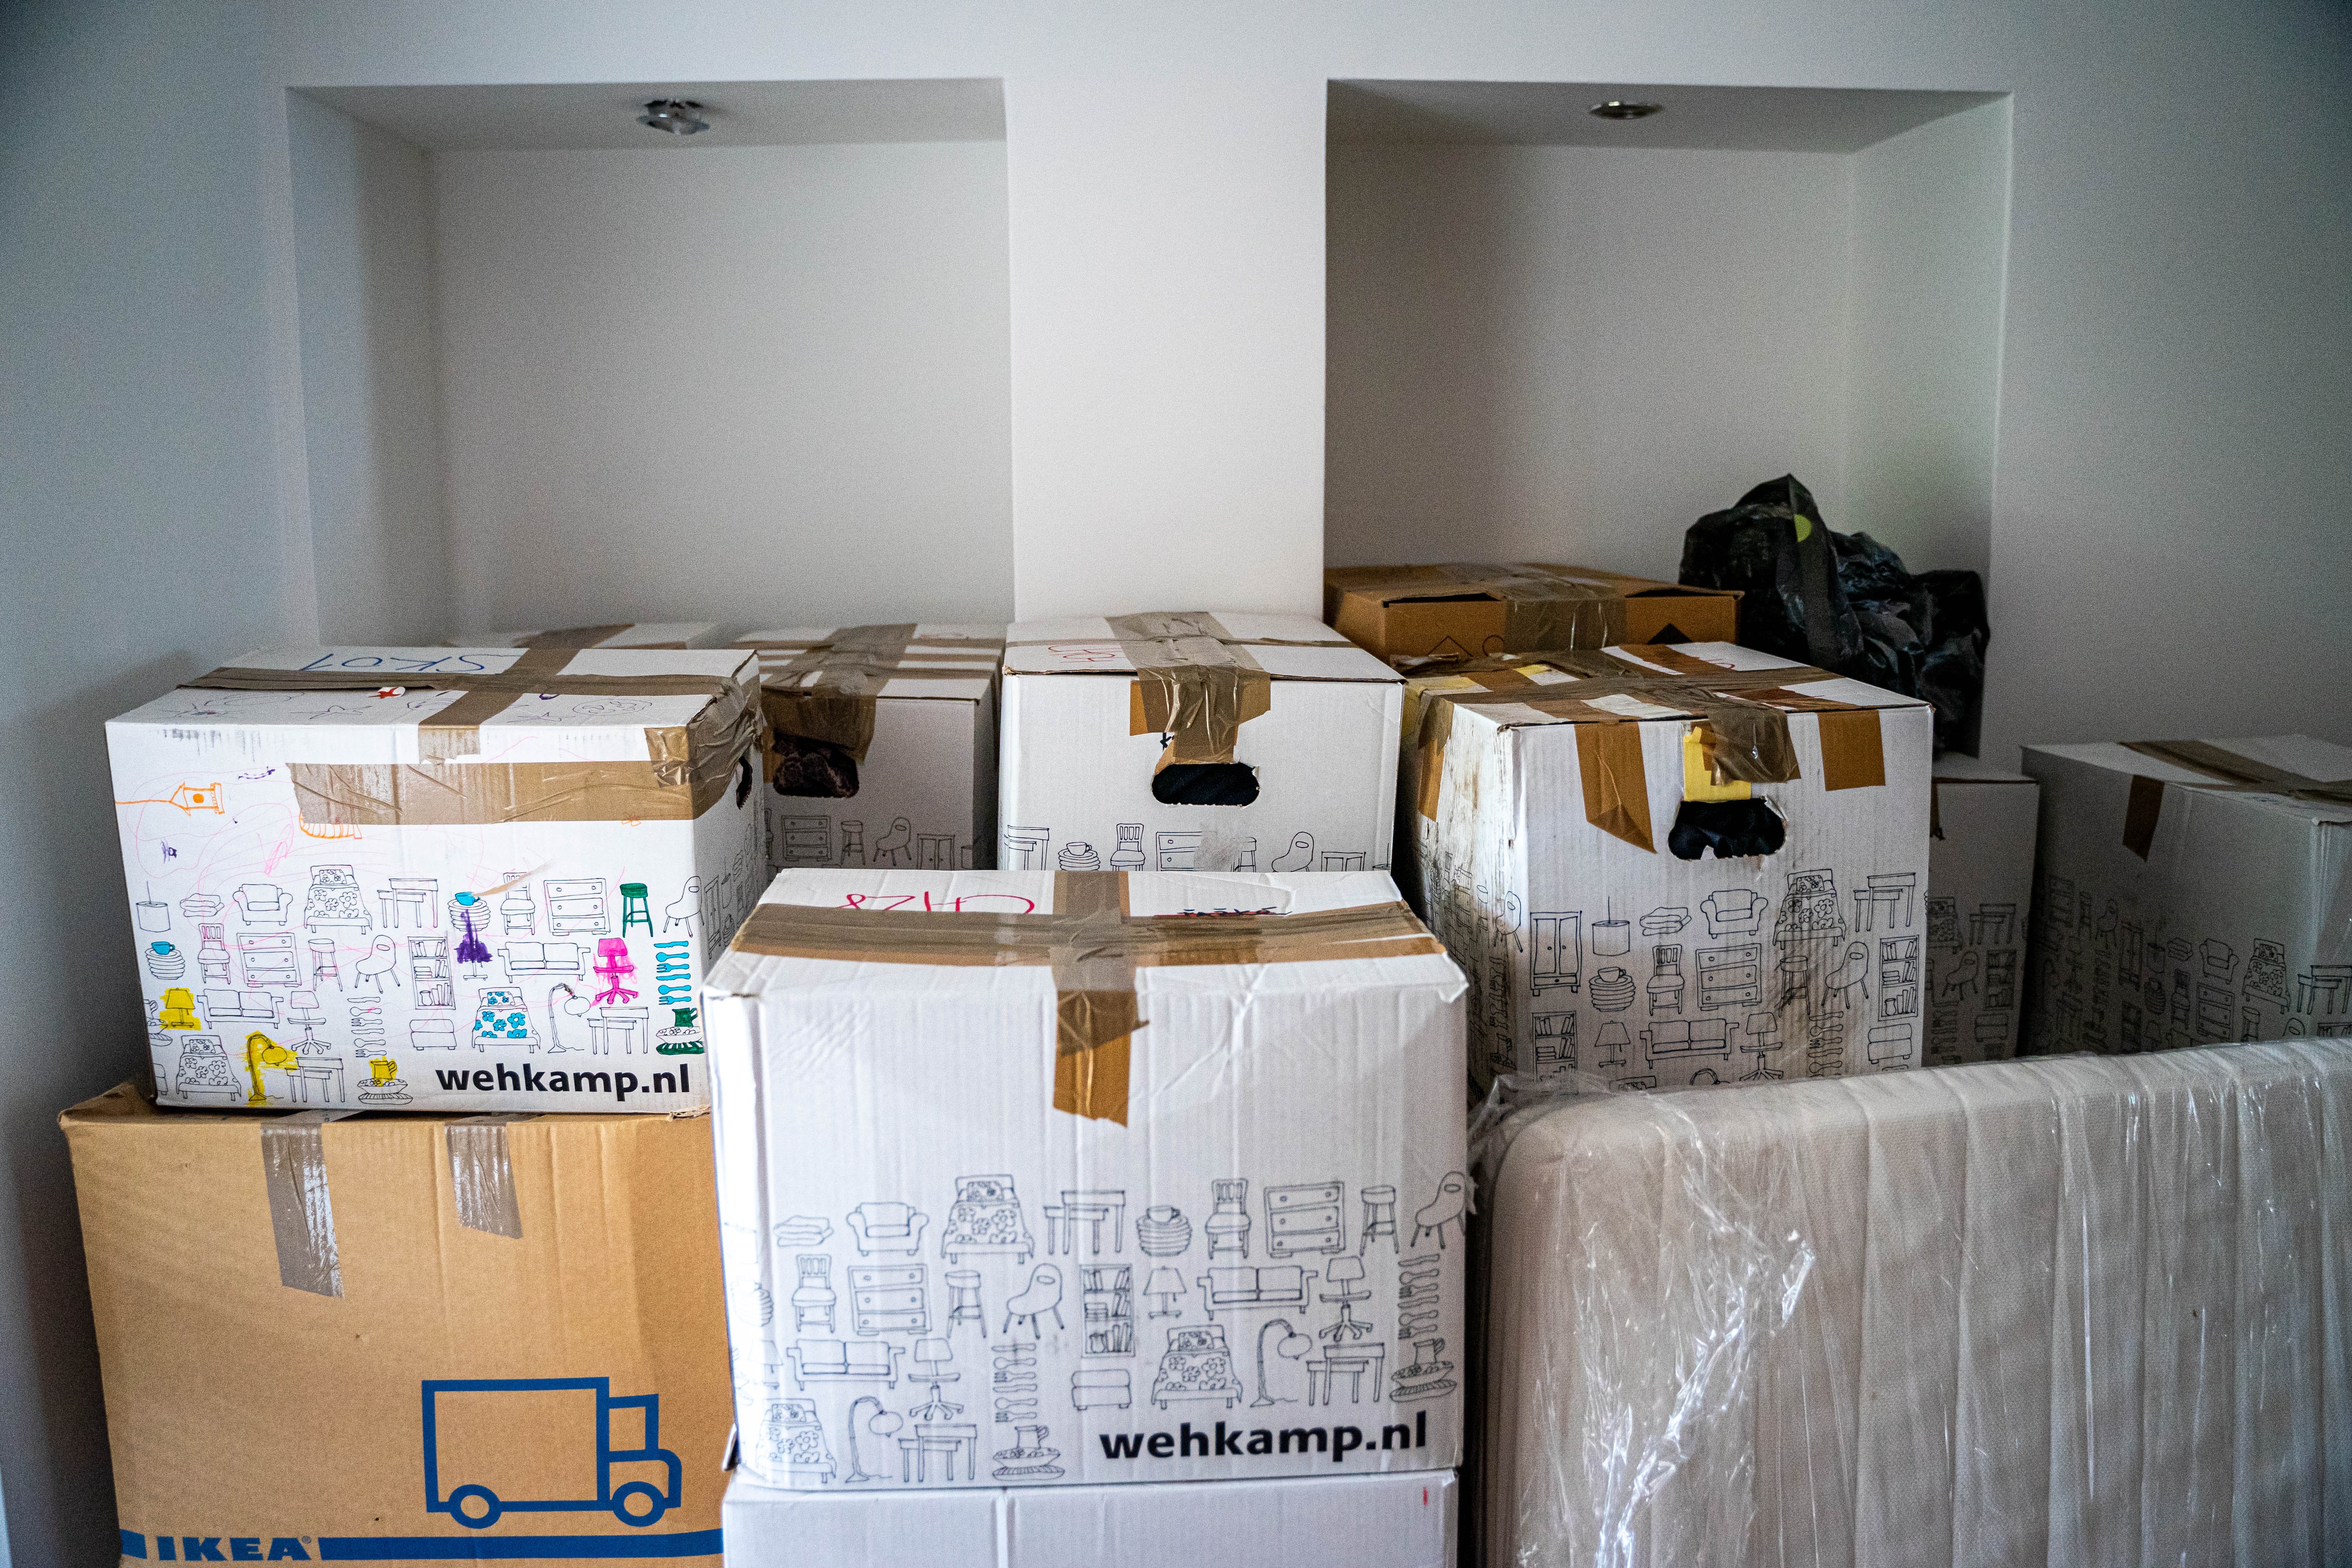 packing-boxes-in-storage